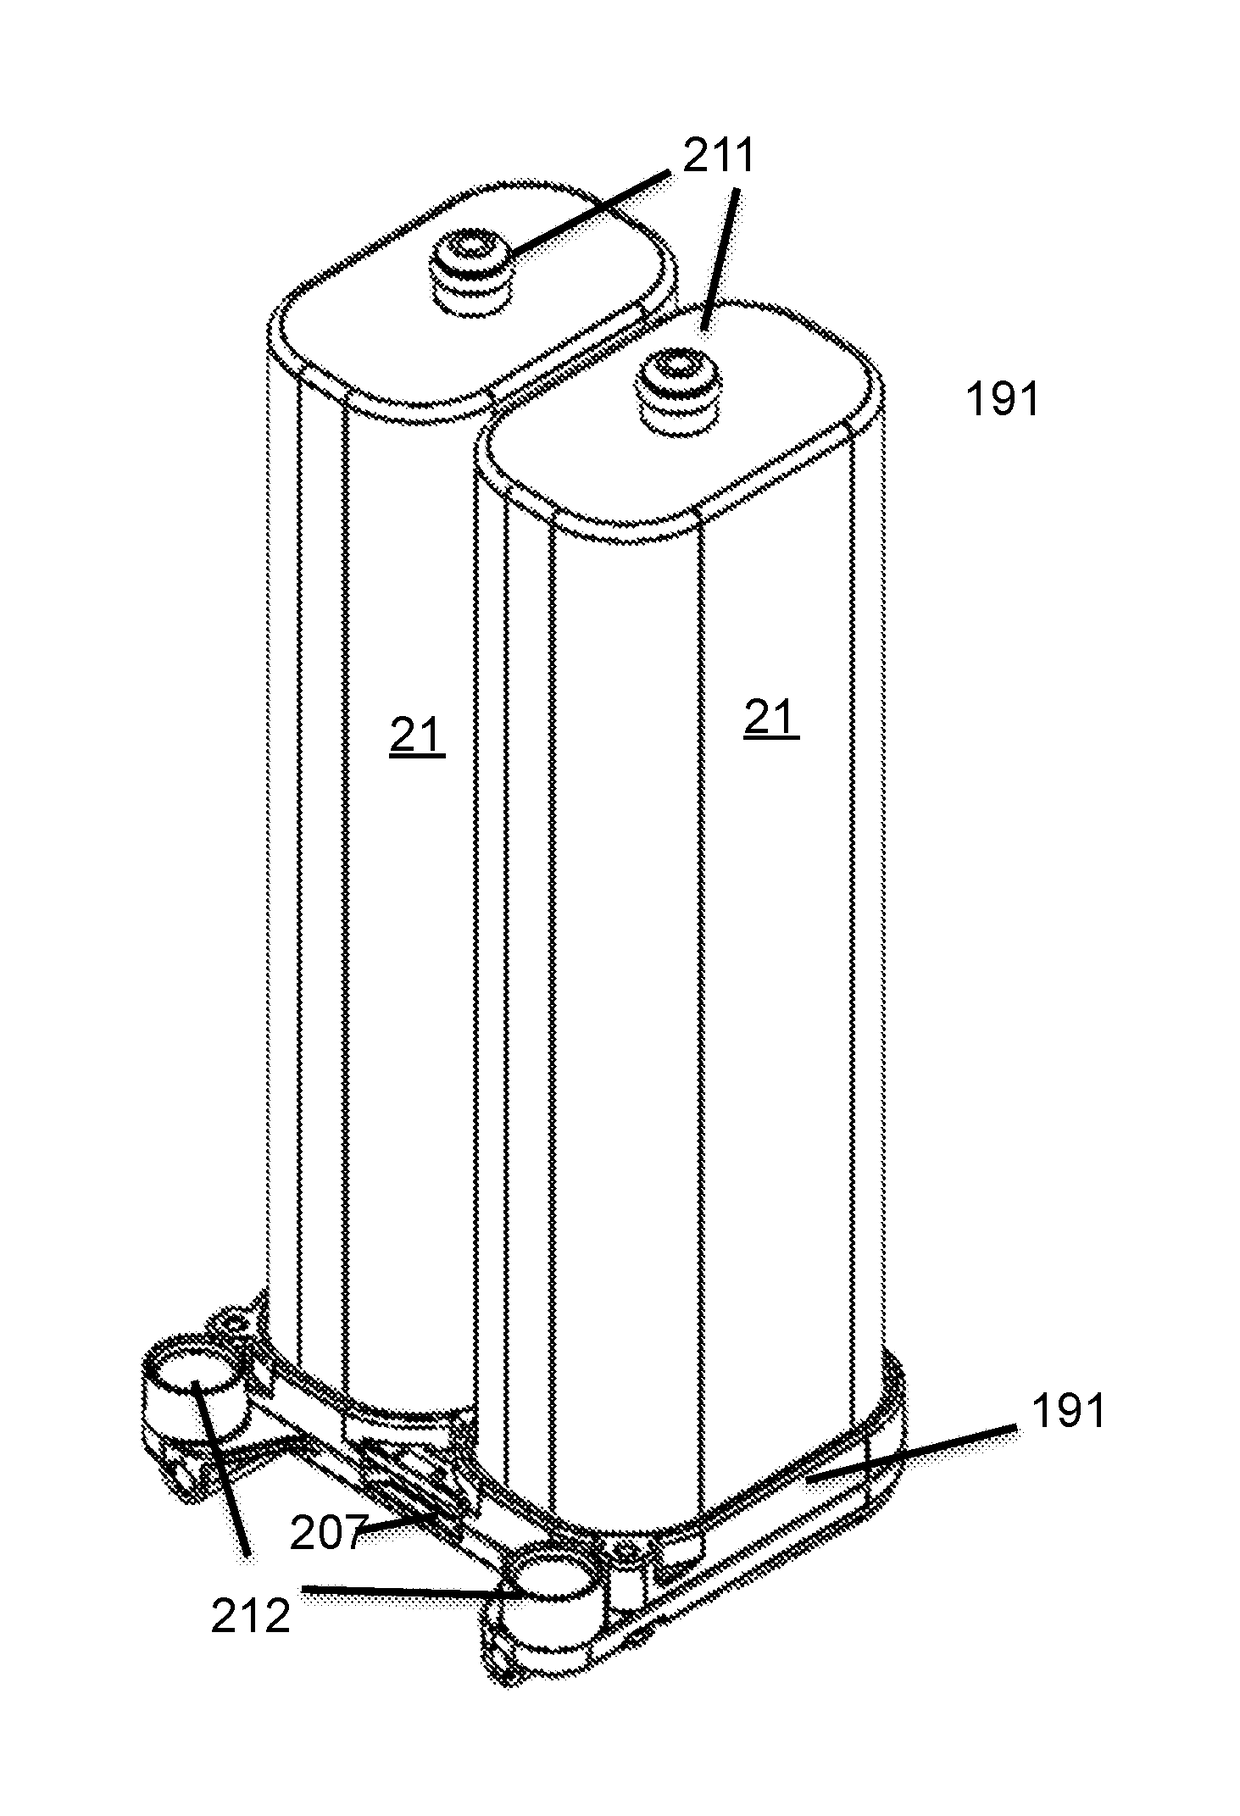 Gas Concentrator with Removable Cartridge Adsorbent Beds